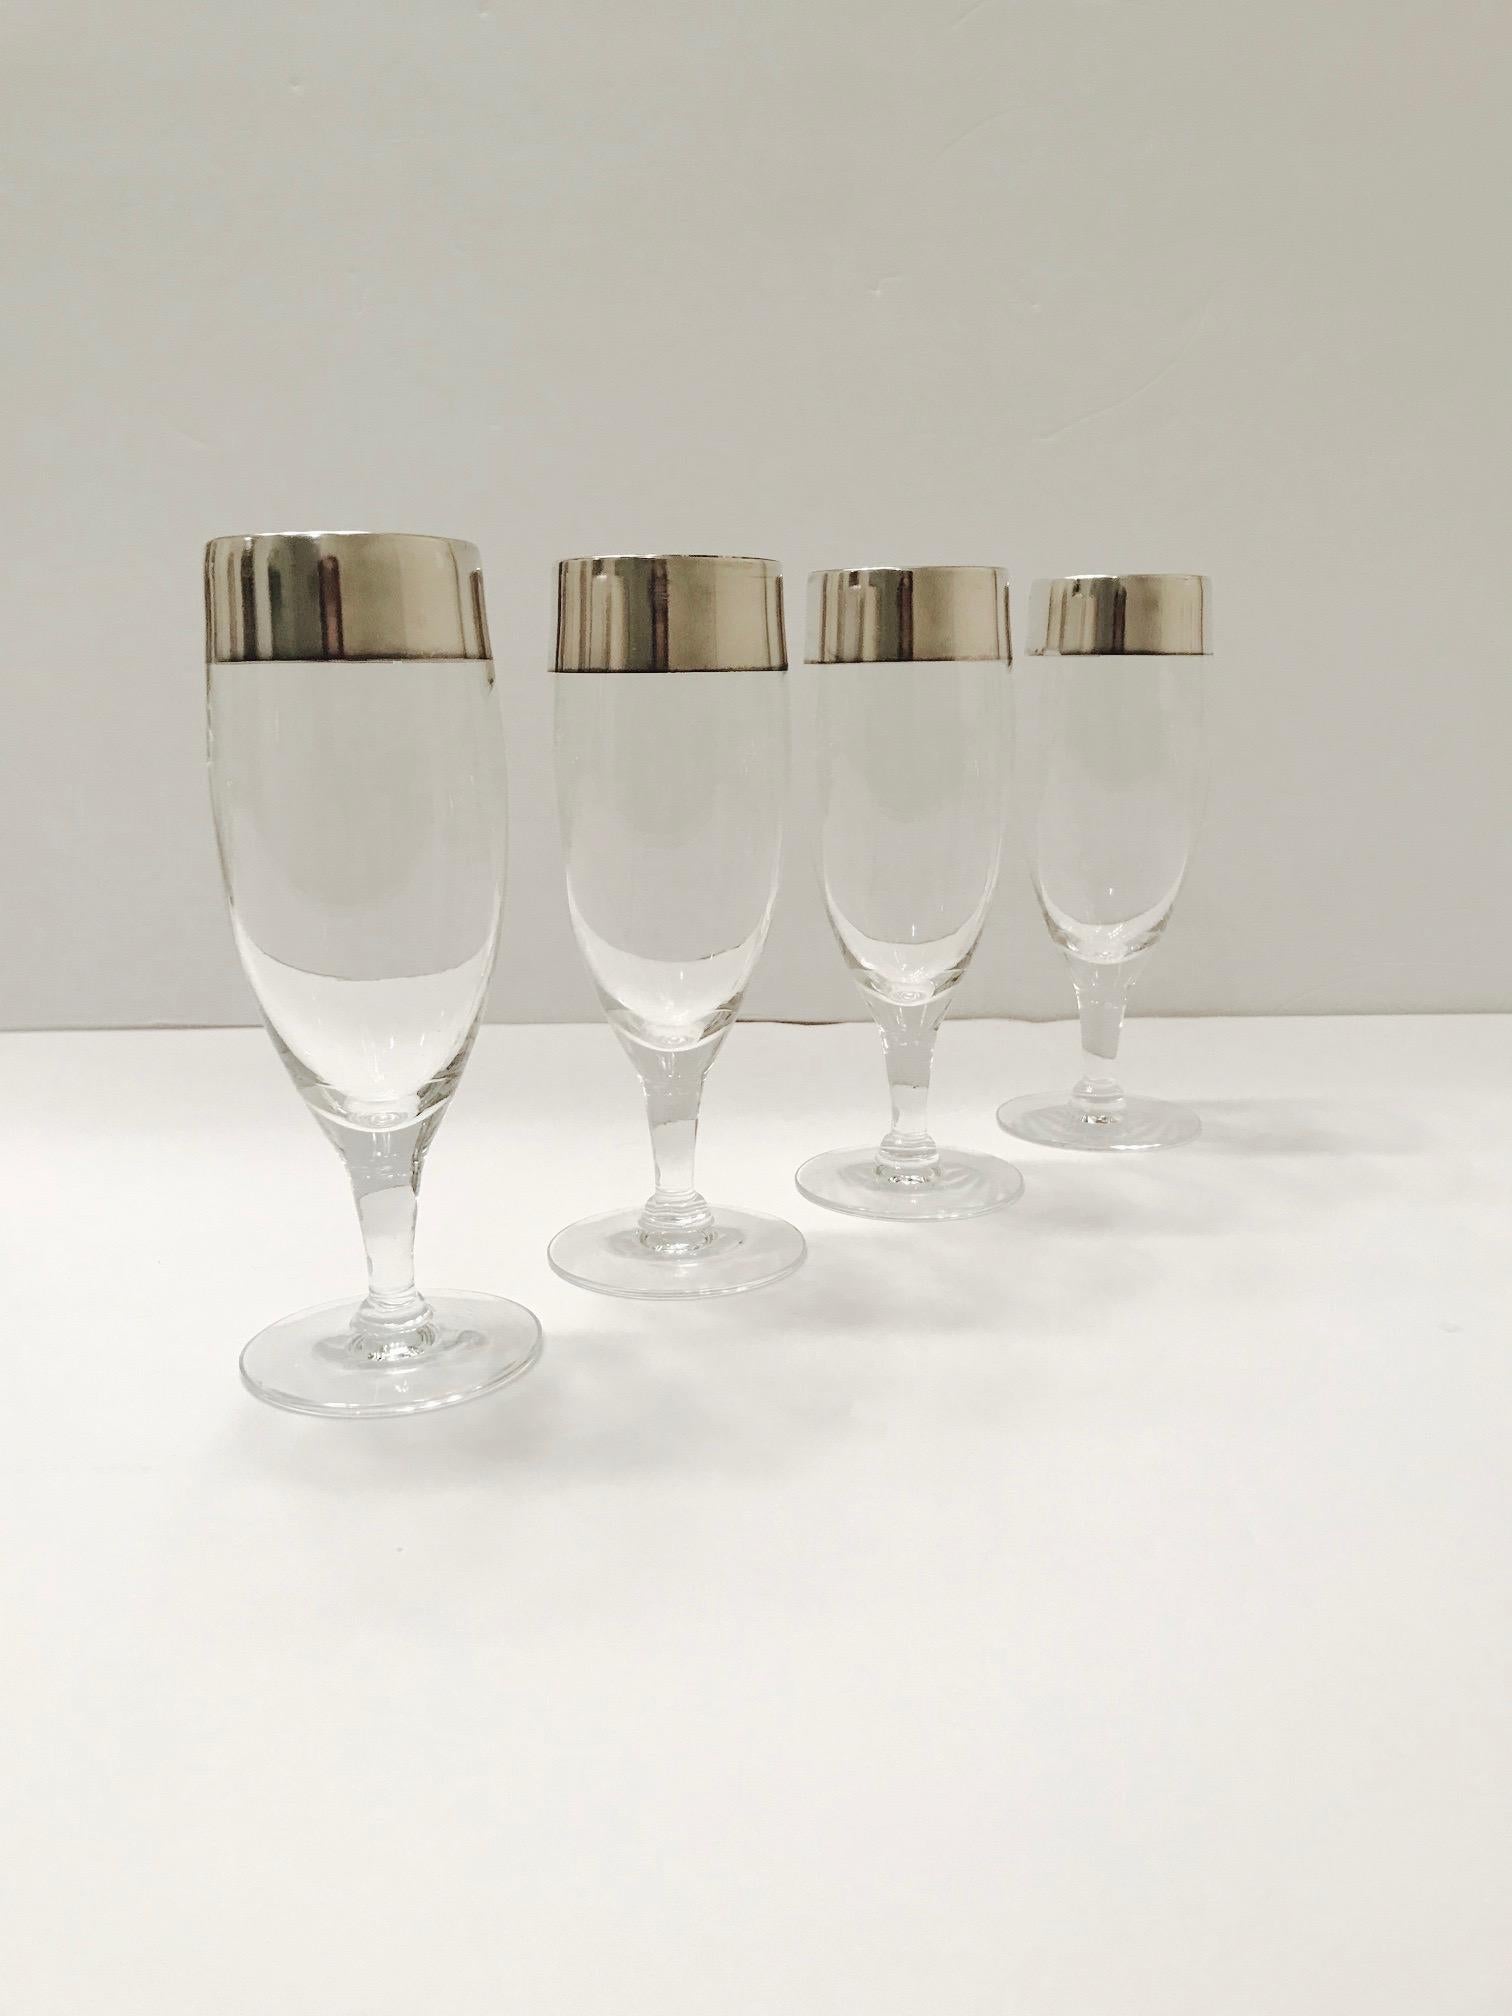 Hand-Crafted Set/Six Champagne Flutes with Sterling Silver Overlay by Dorothy Thorpe, c. 1950